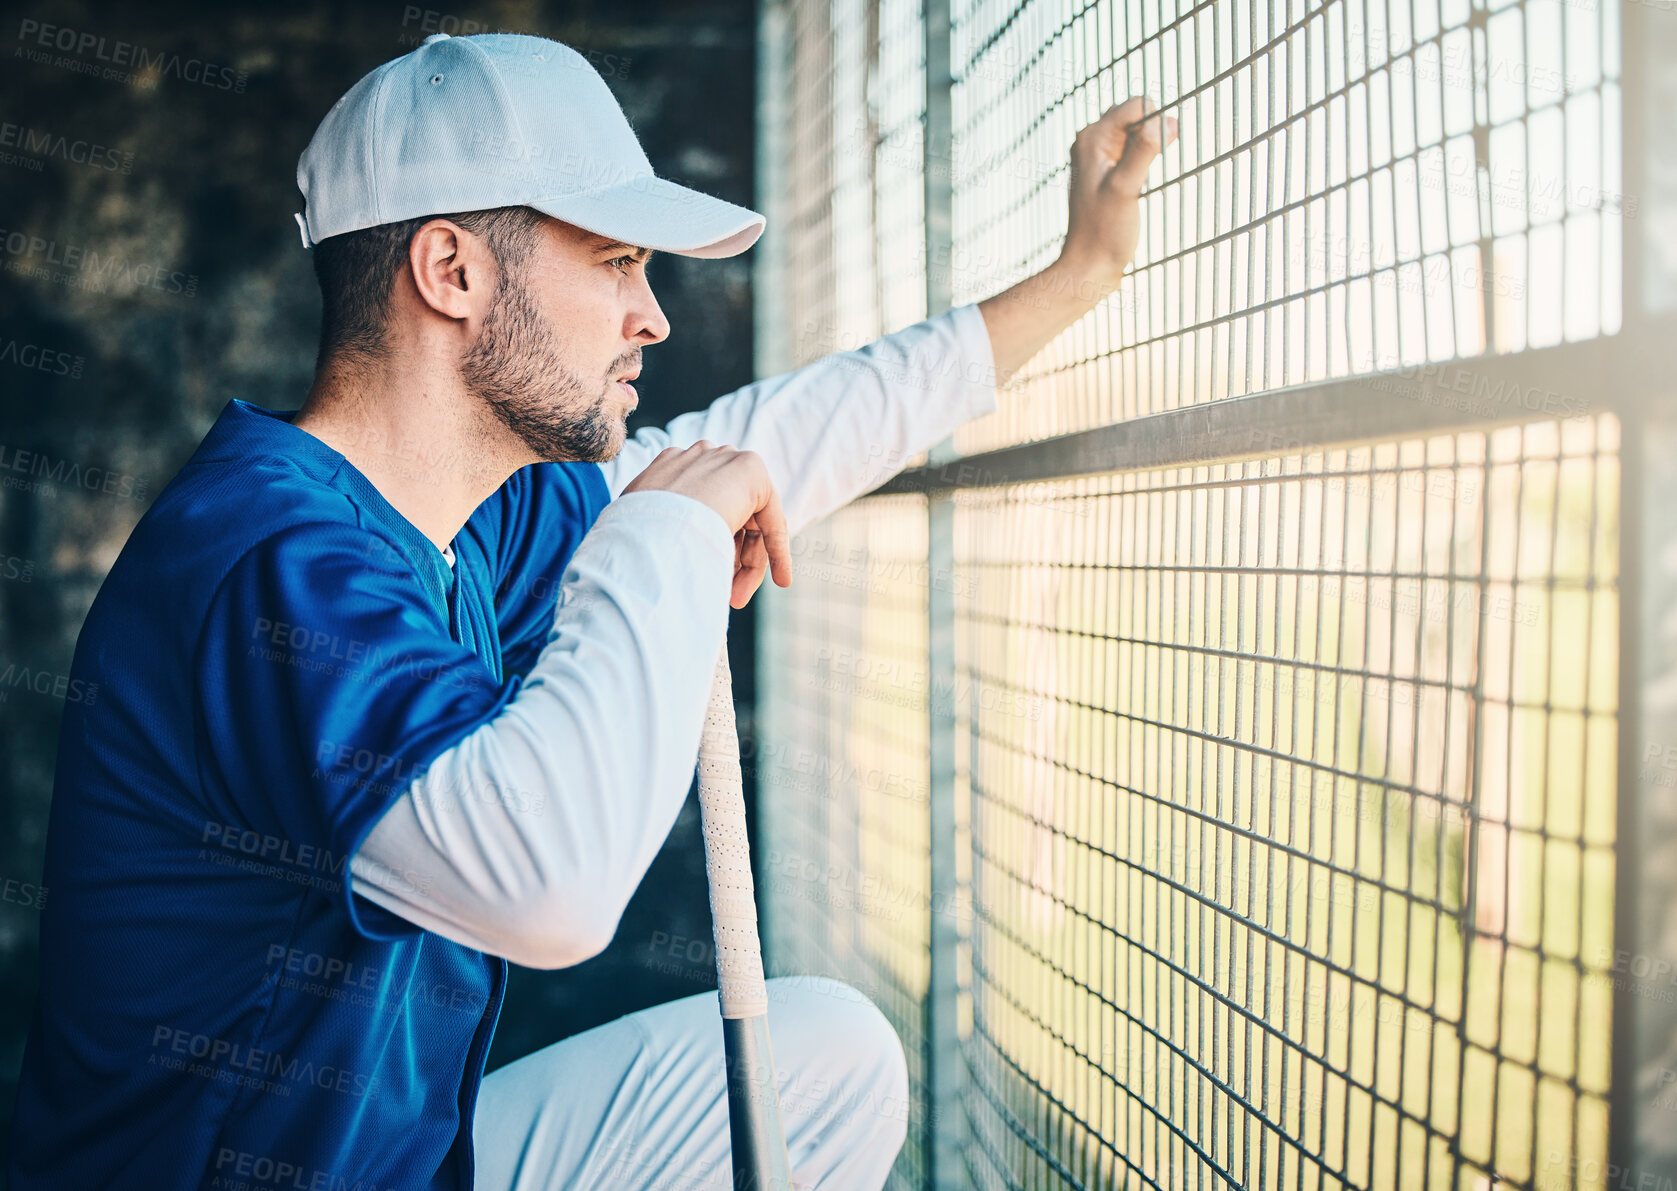 Buy stock photo Baseball, dugout and man watching game holding bat, concentration, competition and sport. Fitness, health and serious sports player waiting for turn to play in fun practice match at stadium or field.